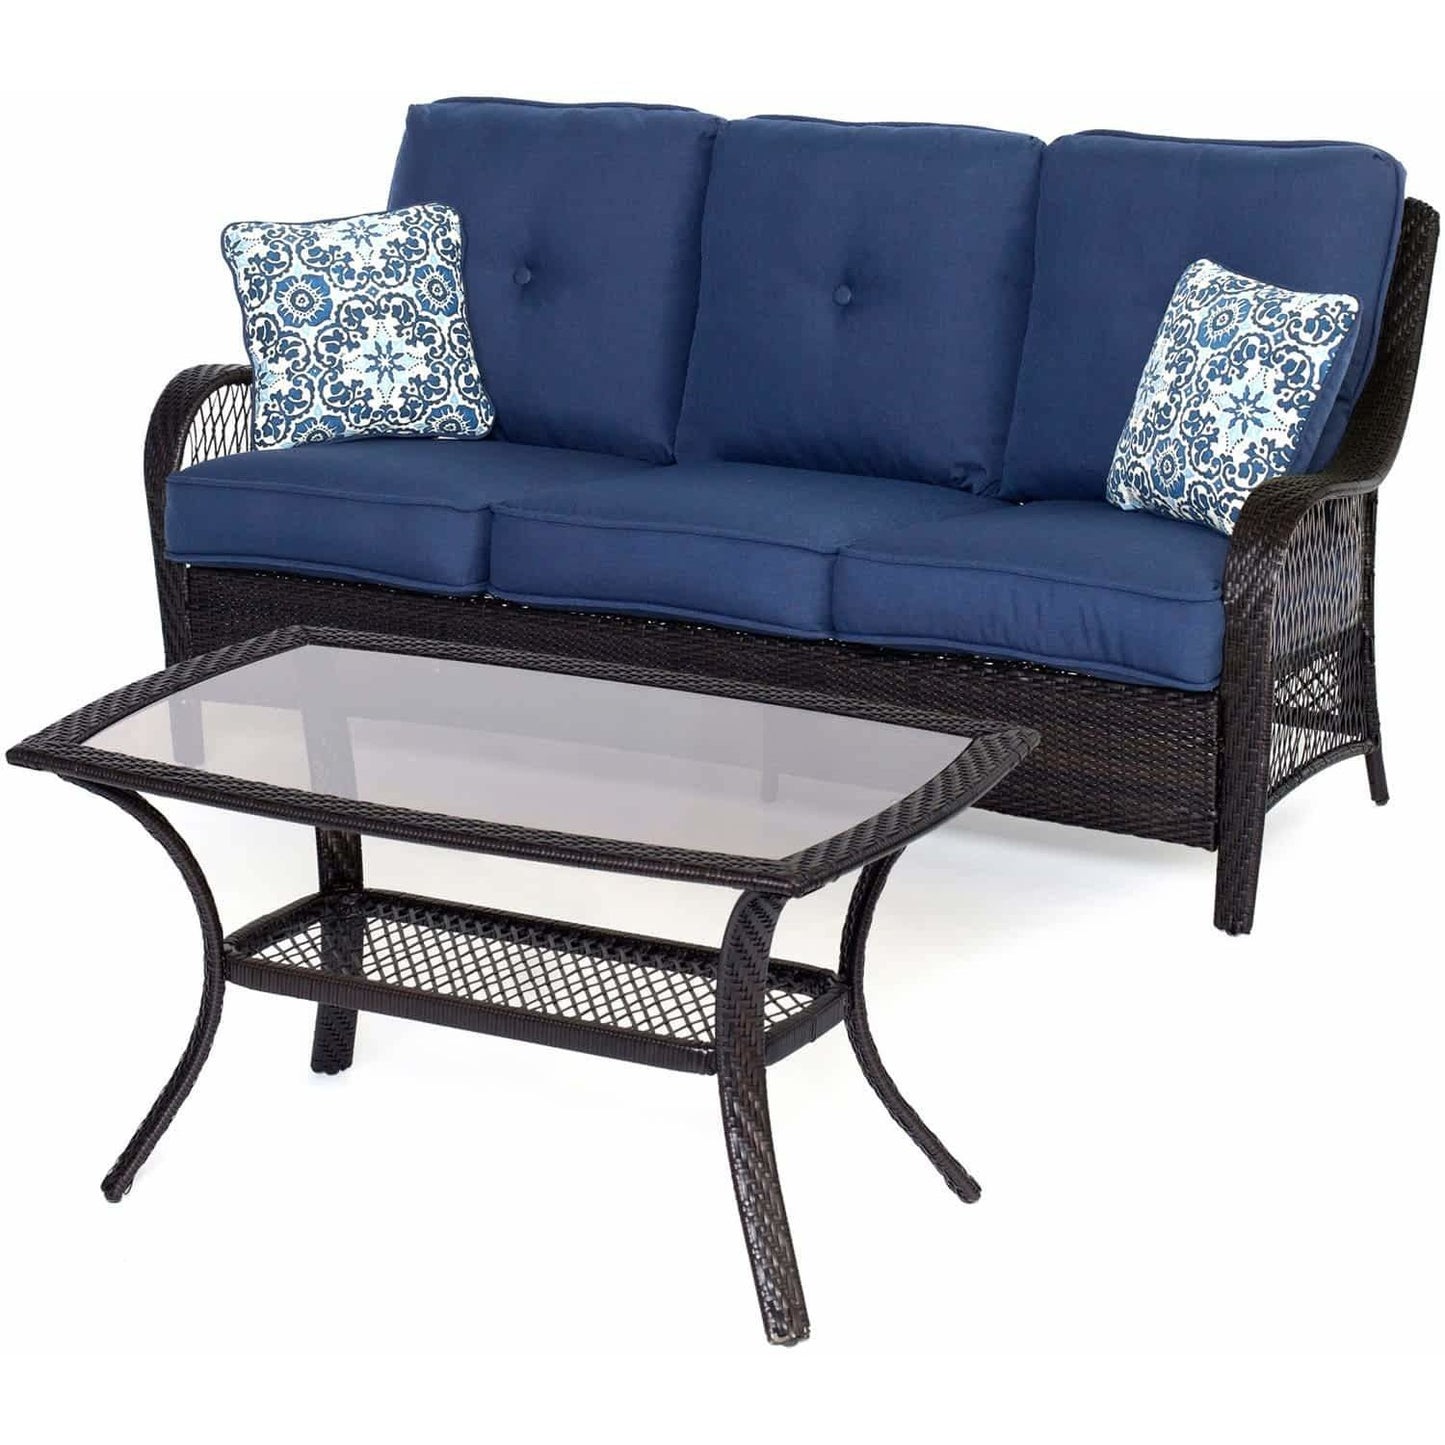 Hammond Brentwood Outdoor Conversation Set Sofa and Coffee Table - M&K Grills